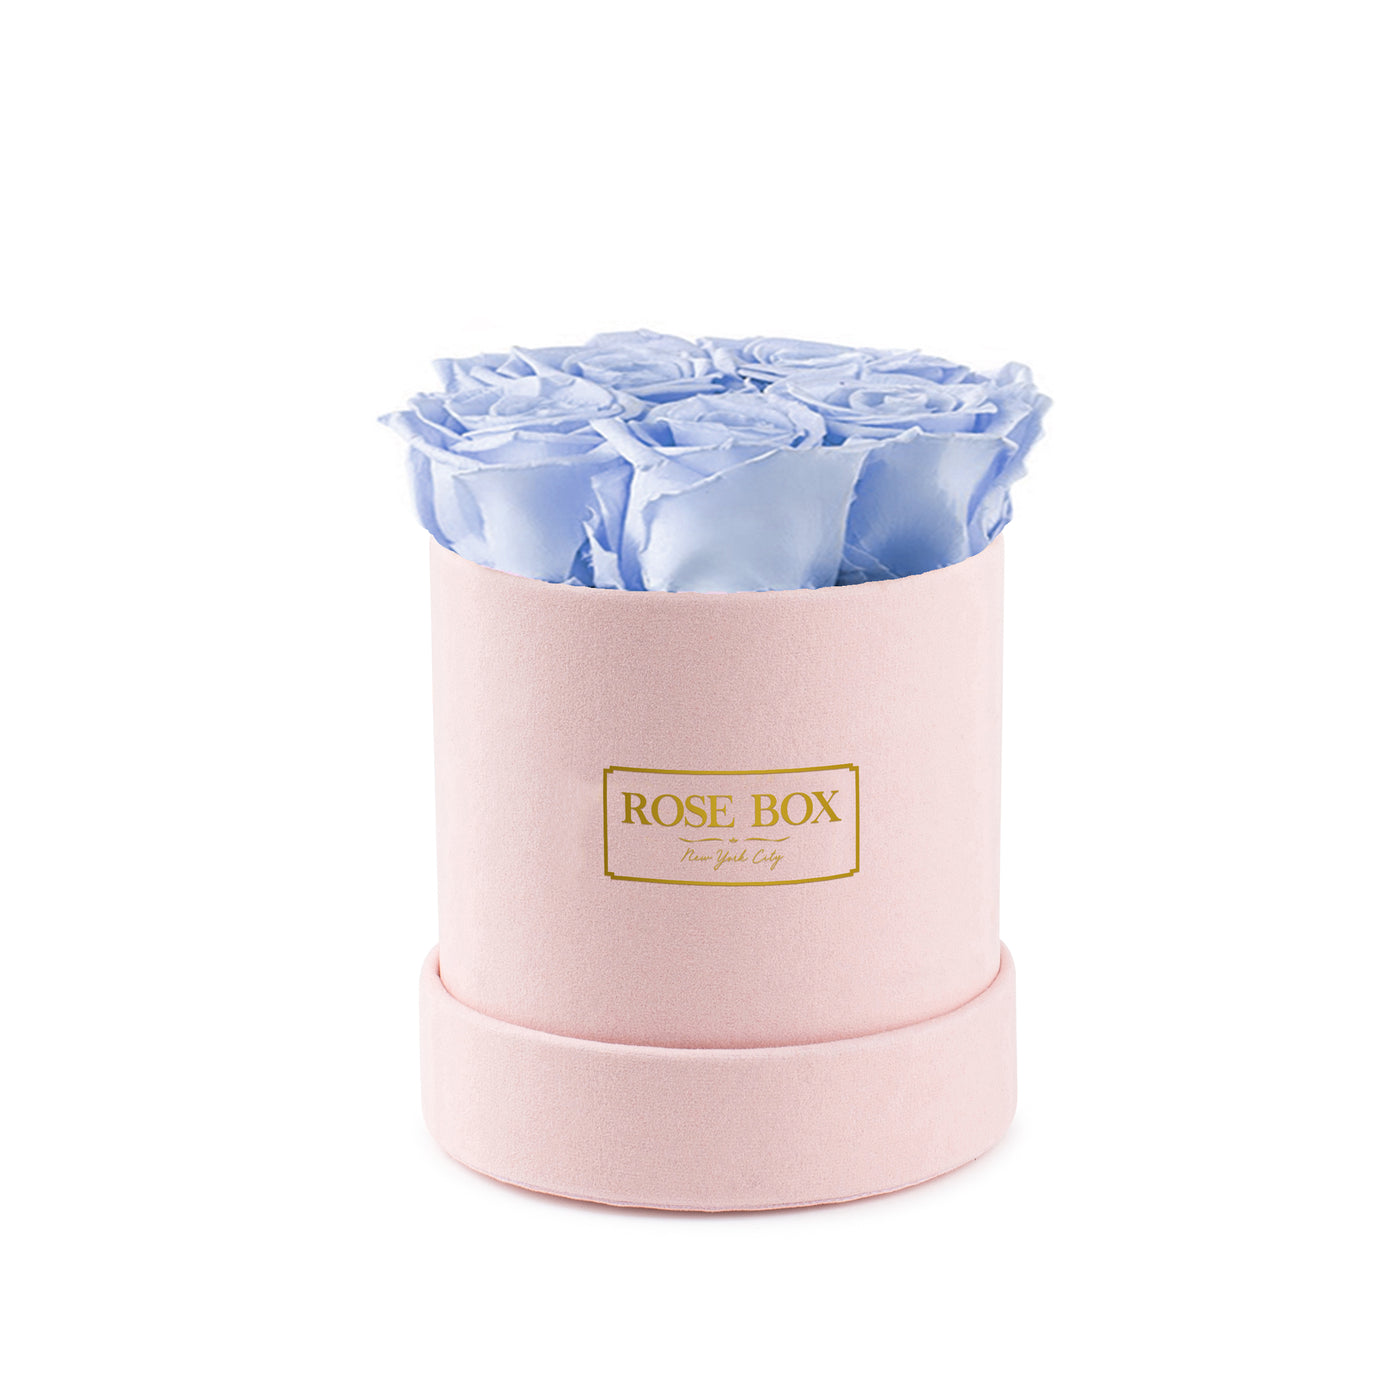 Mini Pink Box with Light Blue Roses